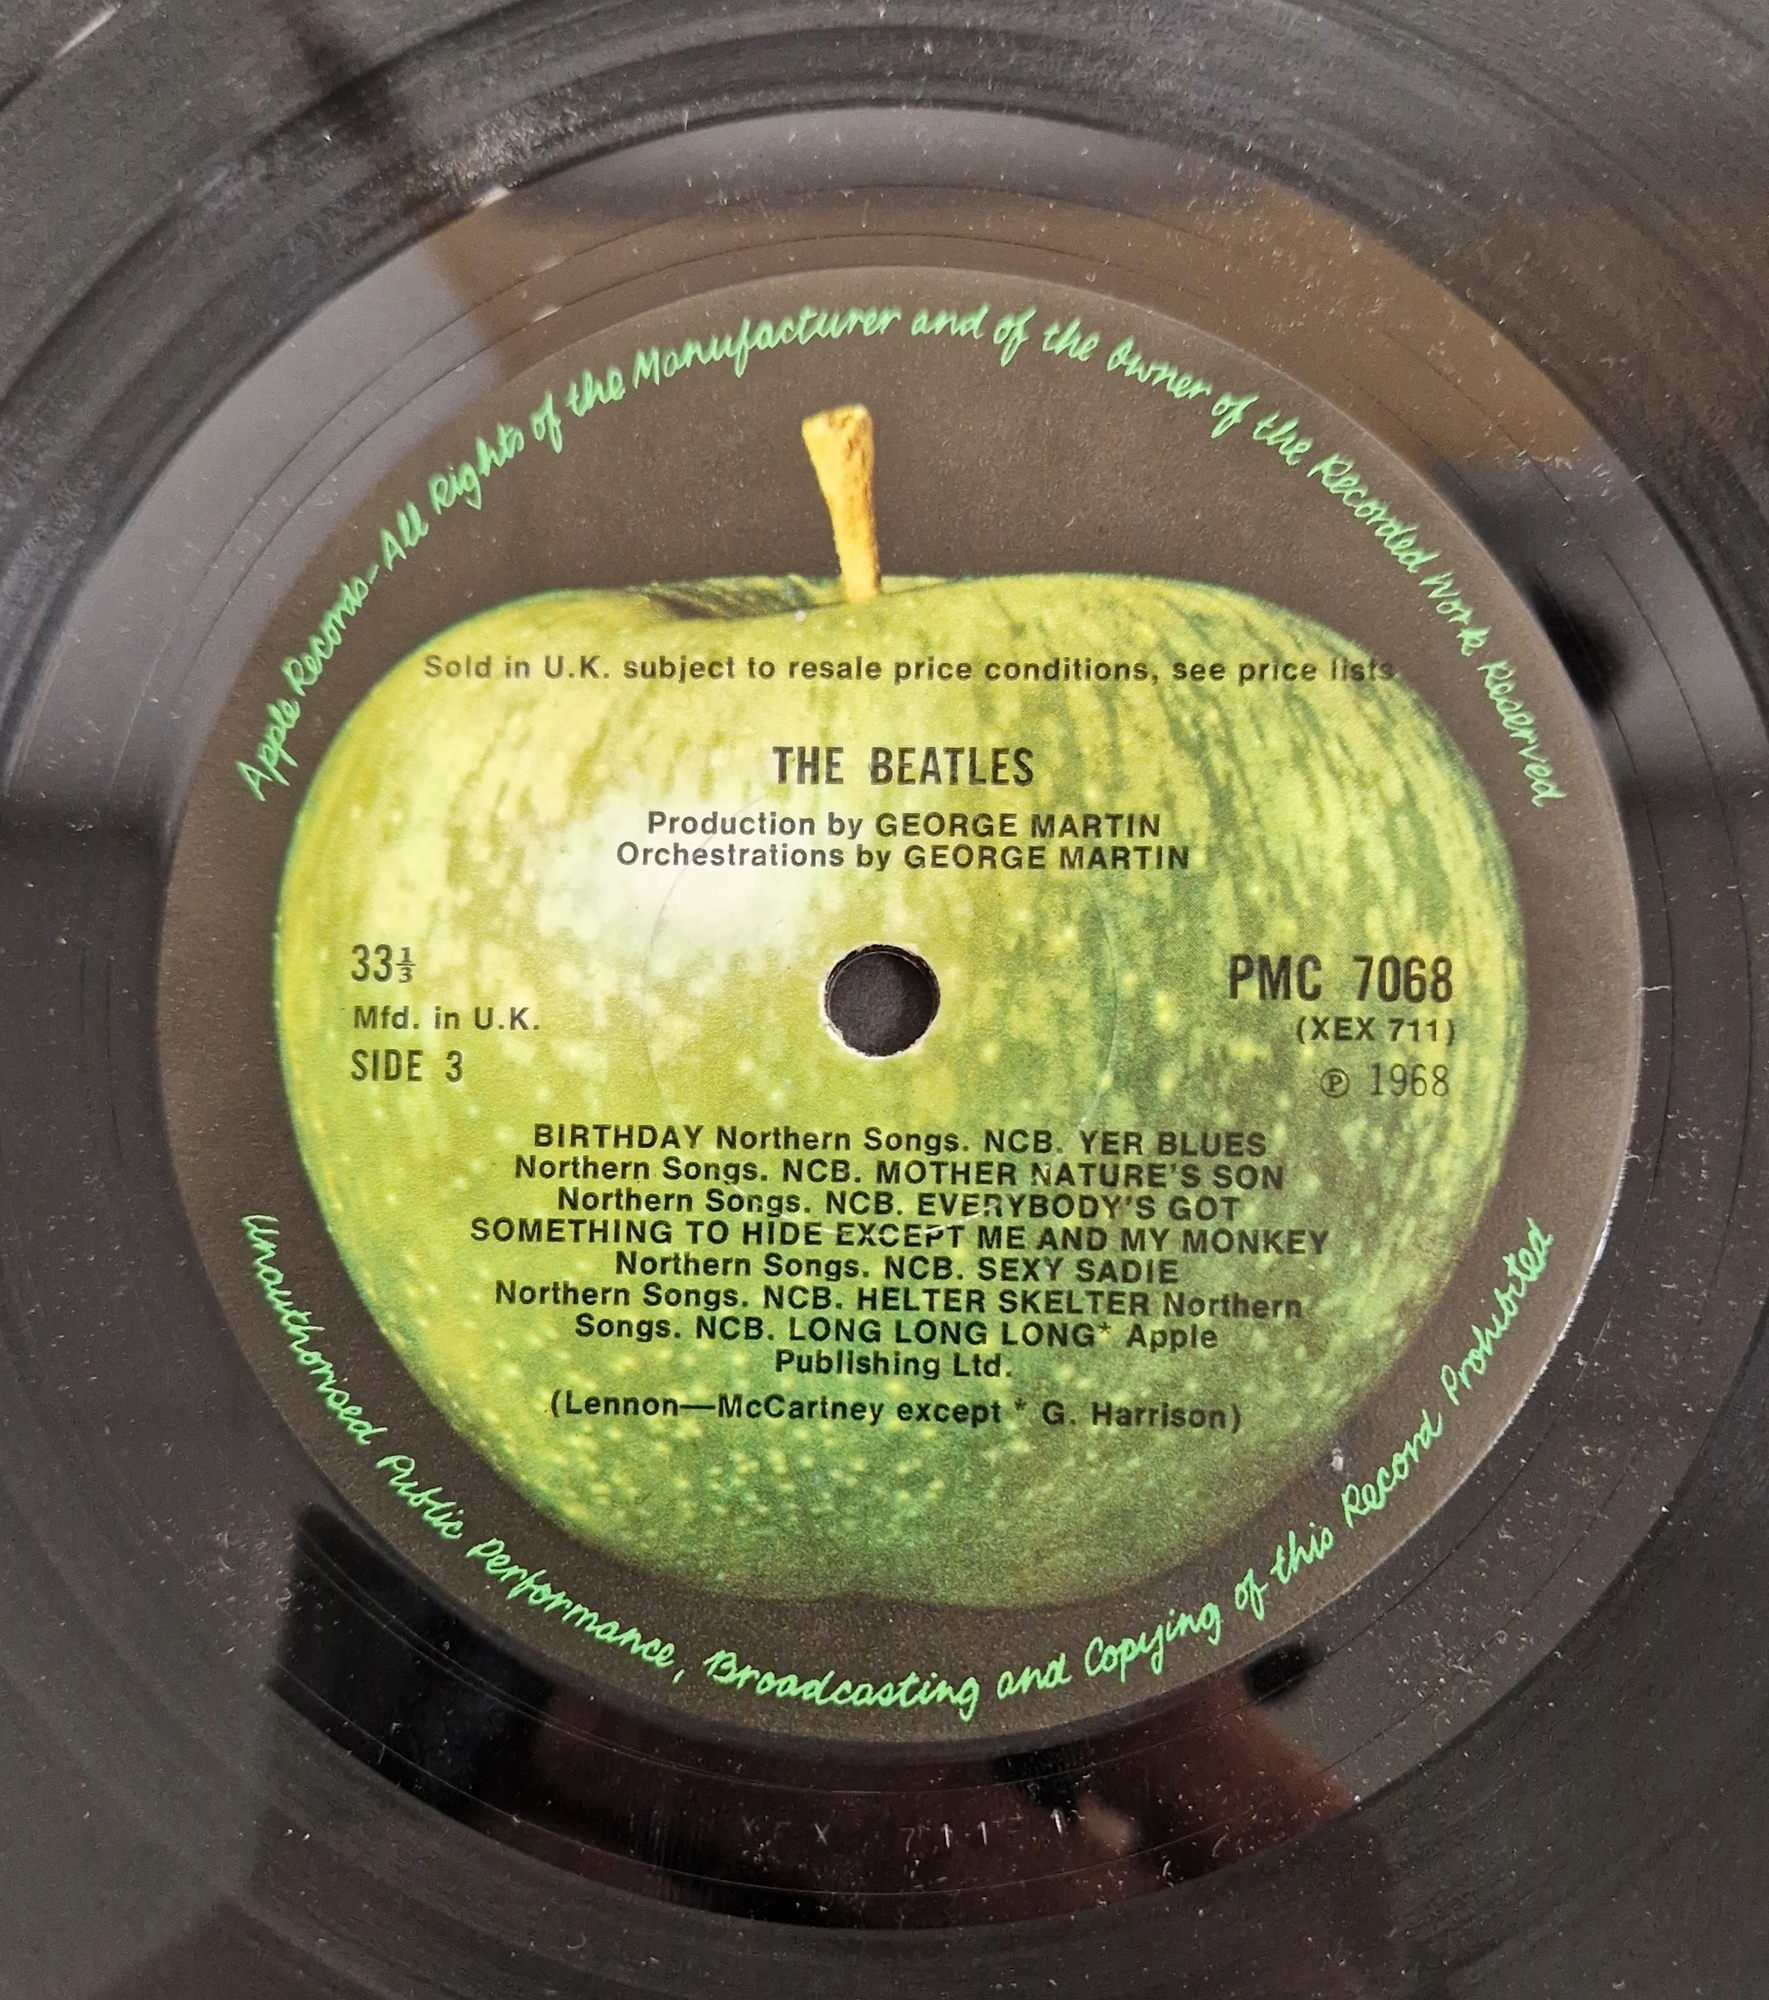 The Beatles, The Beatles (The White Album) PMC7067 (XEX-709/710/711/712-1), Misprint: does not - Image 2 of 10